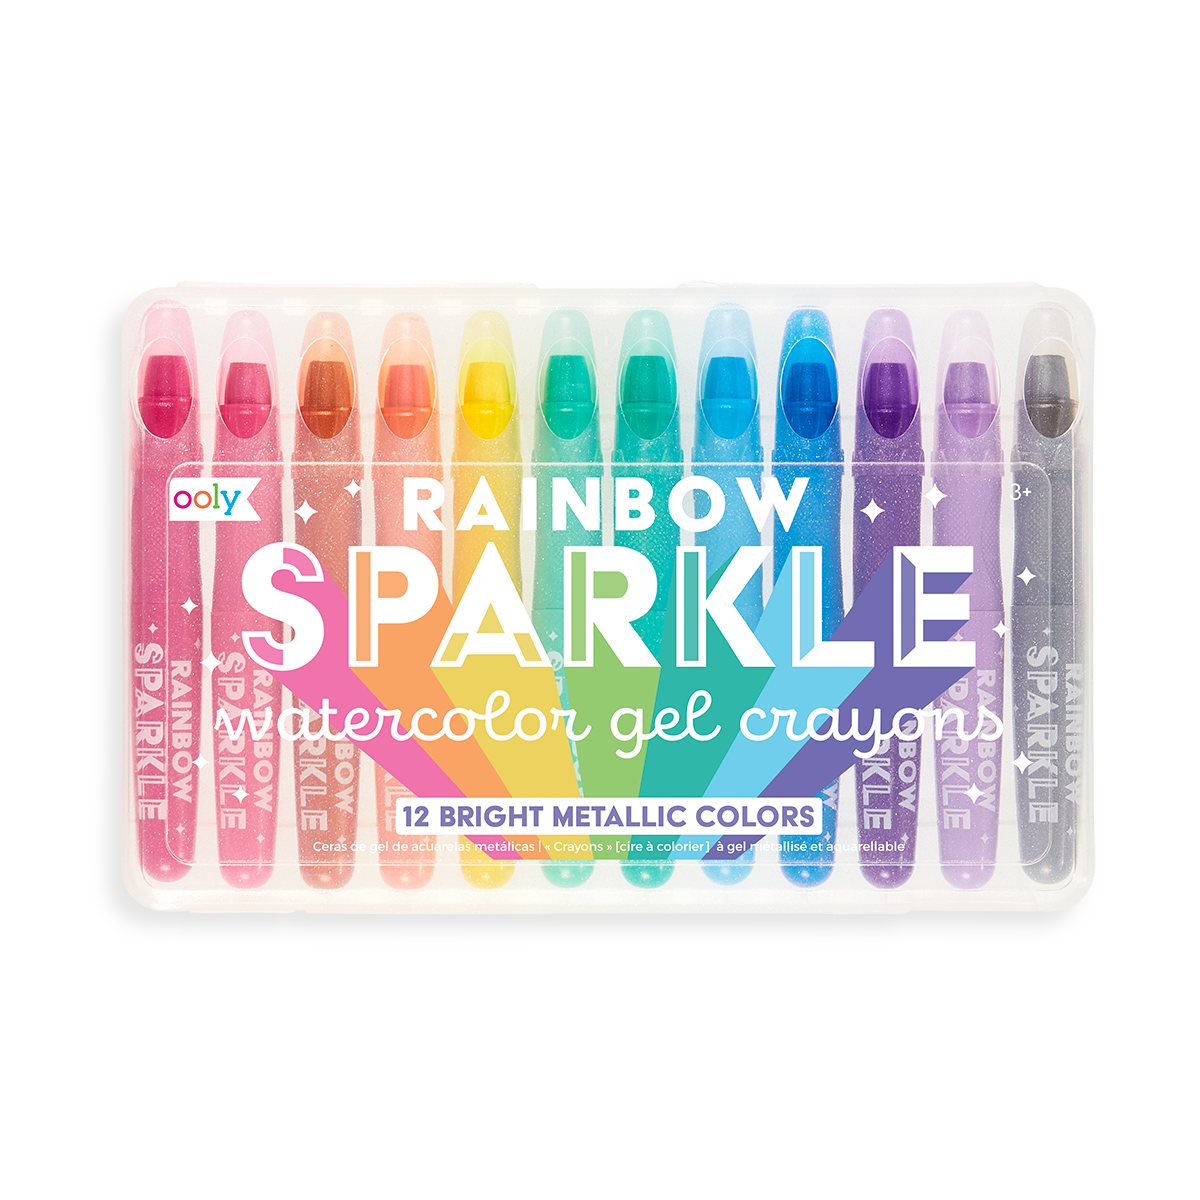 Set of 12 Rainbow Sparkle watercolor gel crayons in a travel case